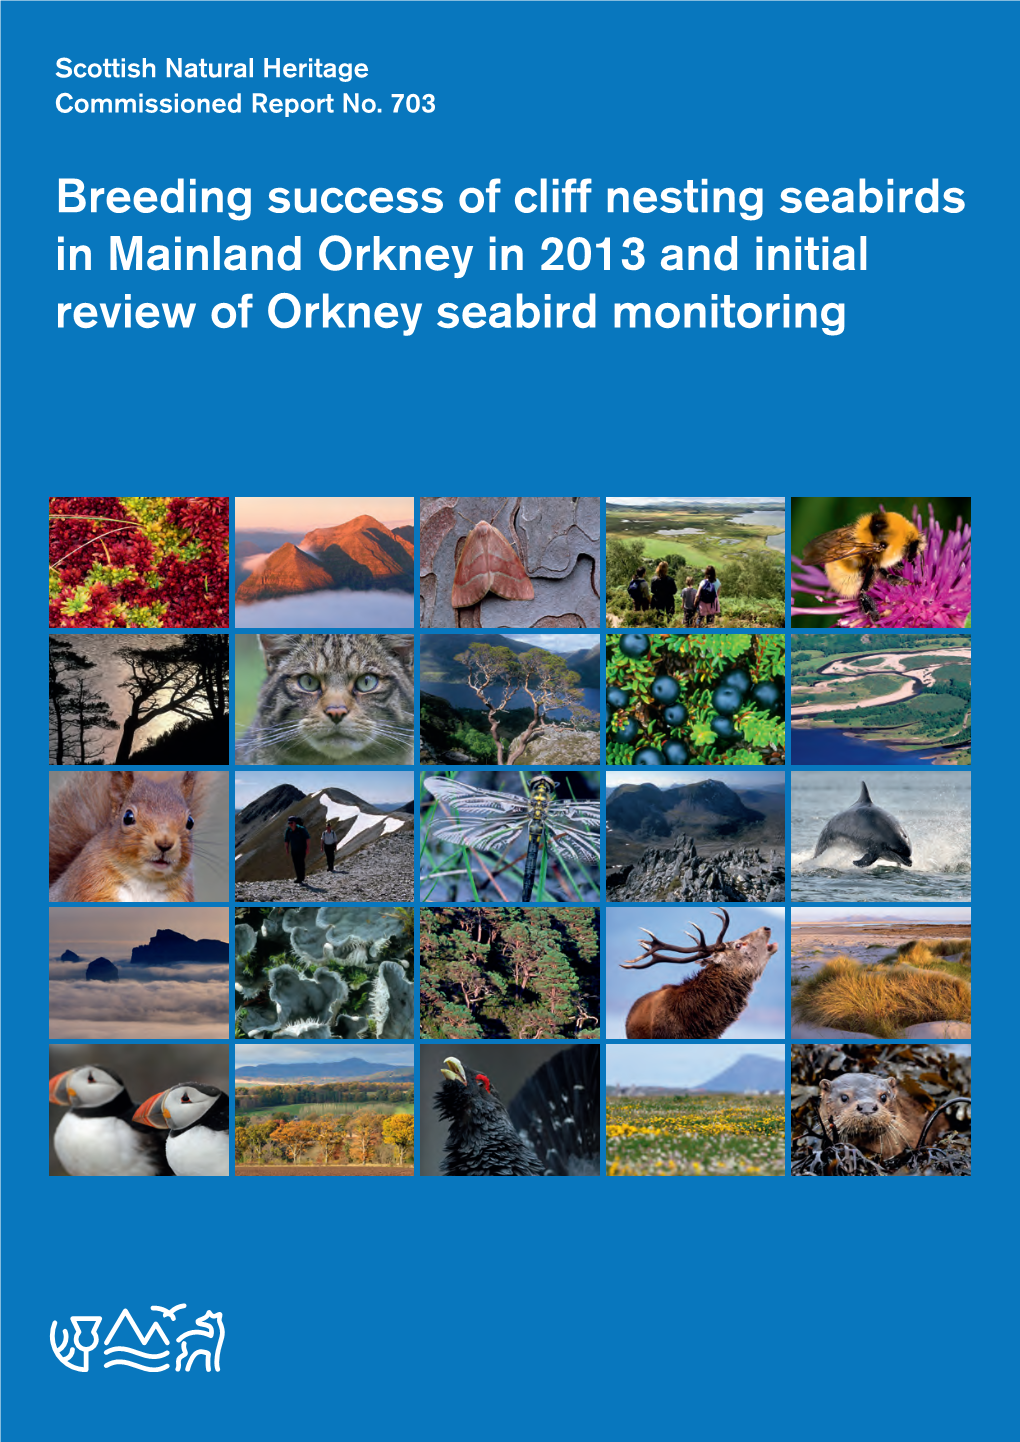 Breeding Success of Cliff Nesting Seabirds in Mainland Orkney in 2013 and Initial Review of Orkney Seabird Monitoring